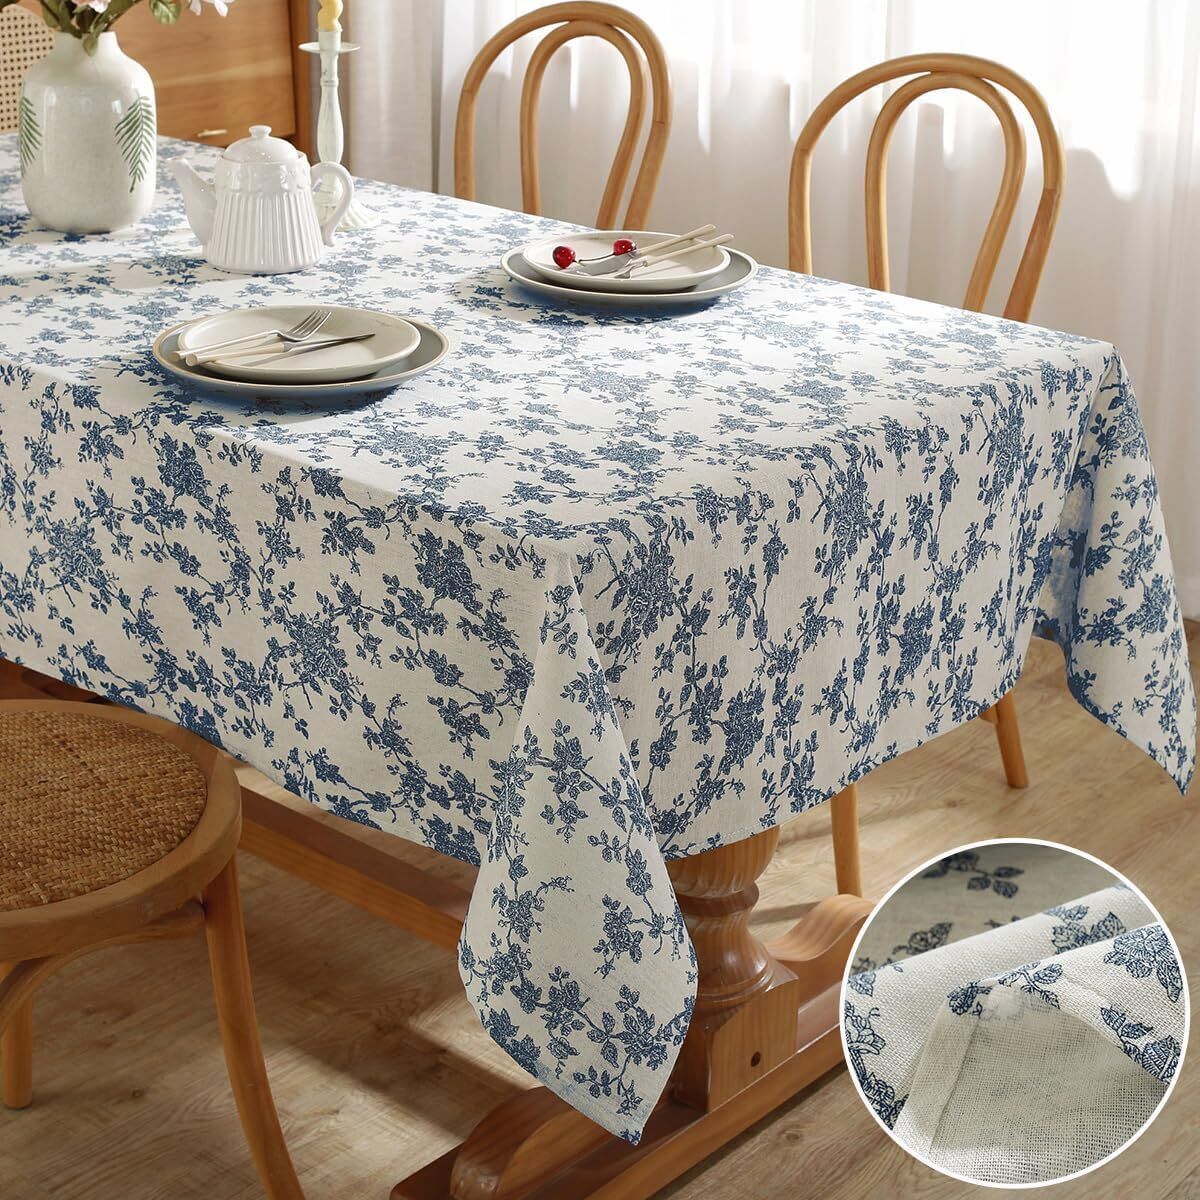 Primary image for Pastoral Cotton Linen Tablecloth Rectangle Washable Vintage Table Cover with Blu